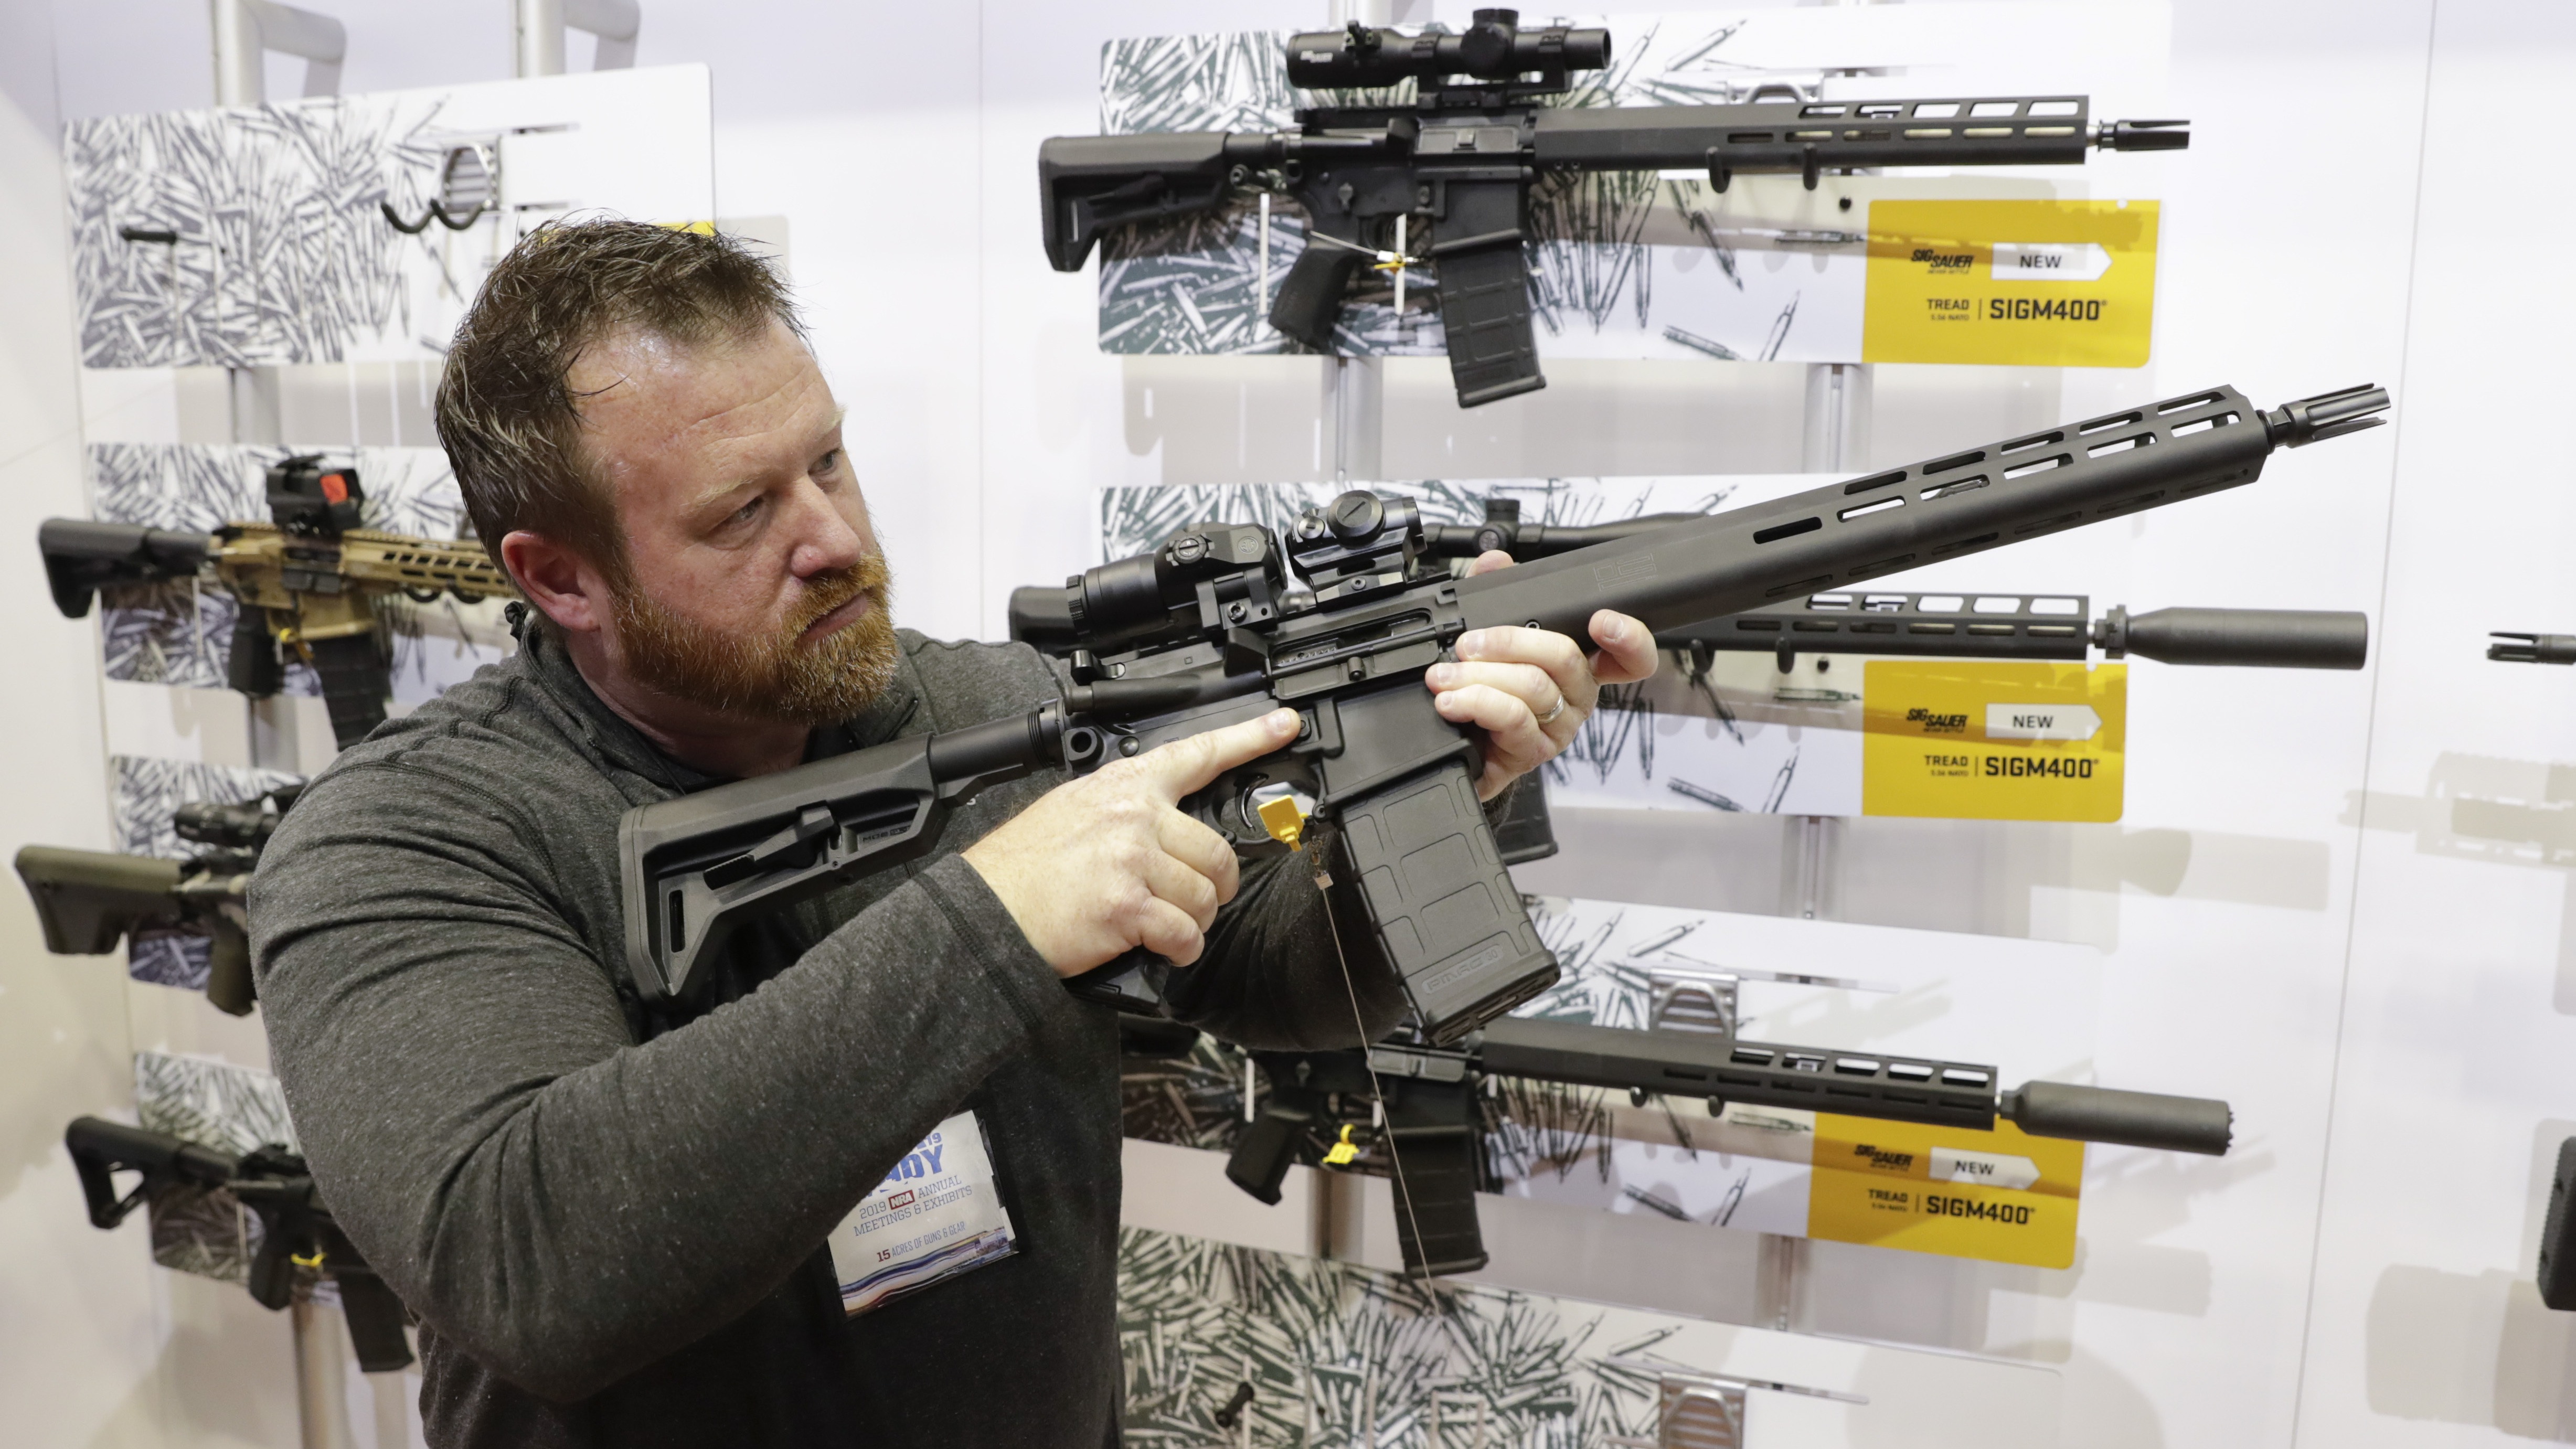 Bryan Oberc, in Munster, Ind., tries out an AR-15 from Sig Sauer in the exhibition hall at the National Rifle Association Annual Meeting in Indianapolis in 2019. CREDIT: Michael Conroy/AP